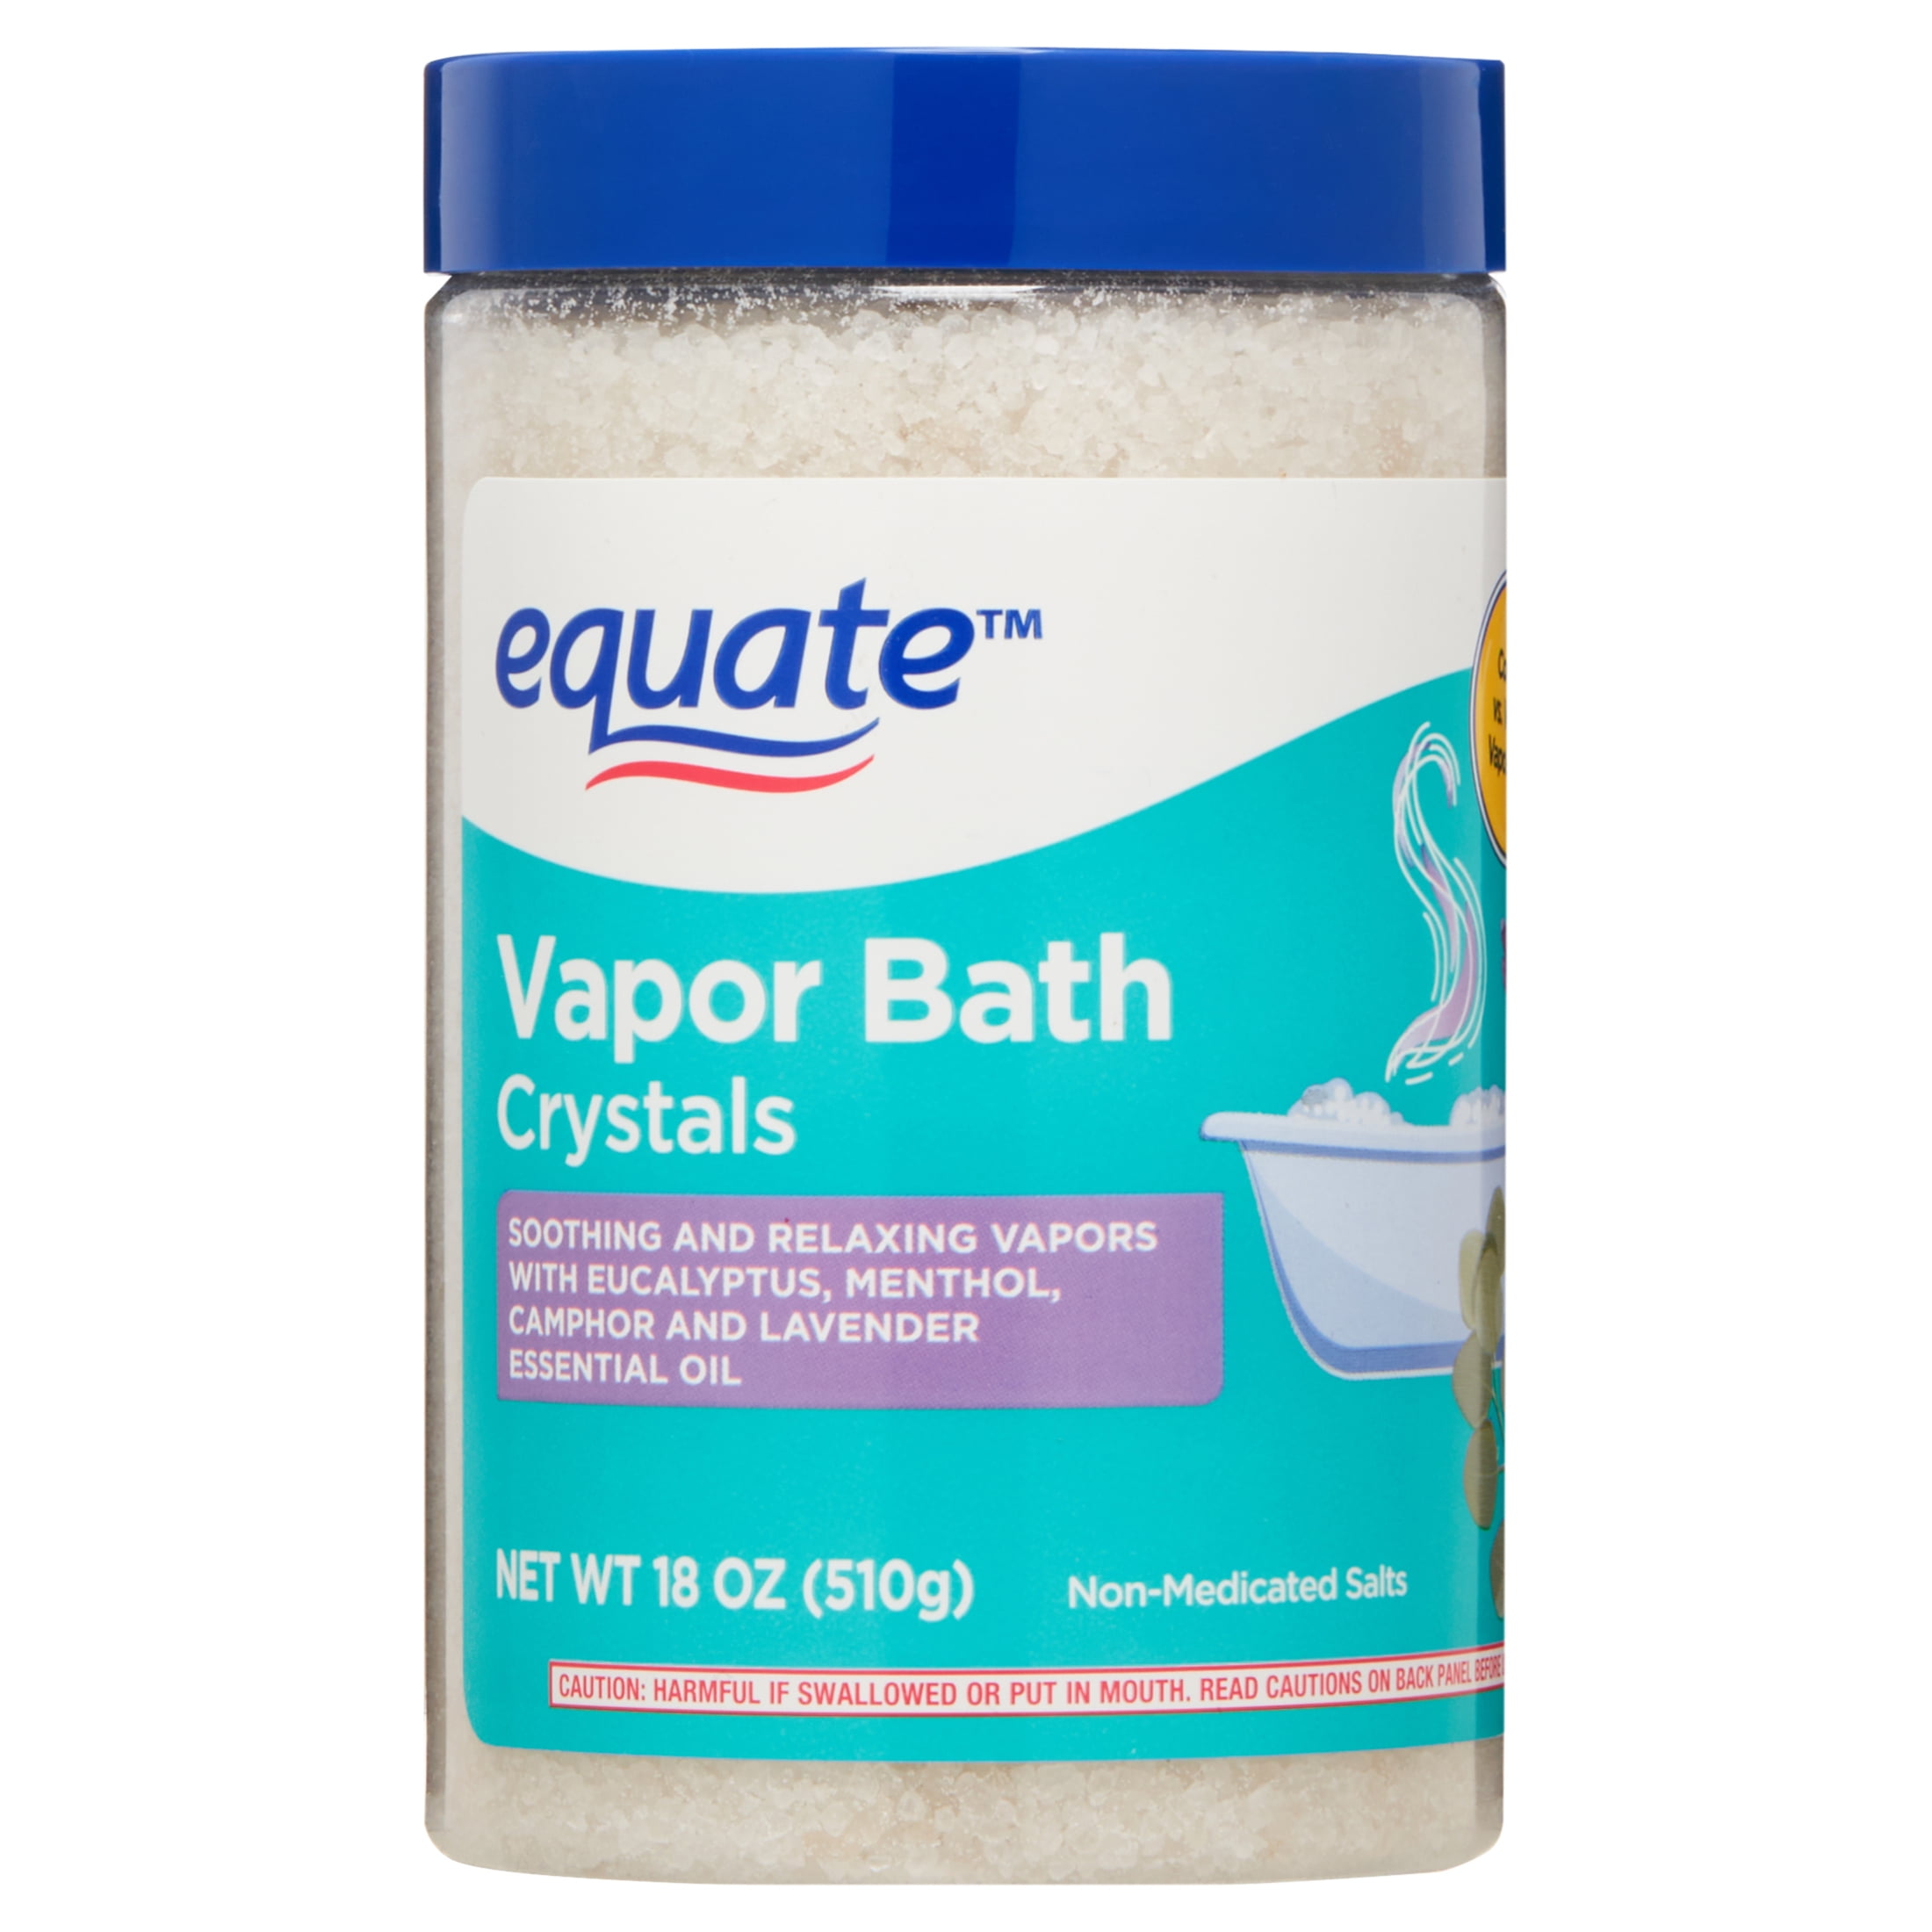 Equate Vapor Bath Crystals Salt Soak for Relief of Muscle Aches and Pains, 18 oz.